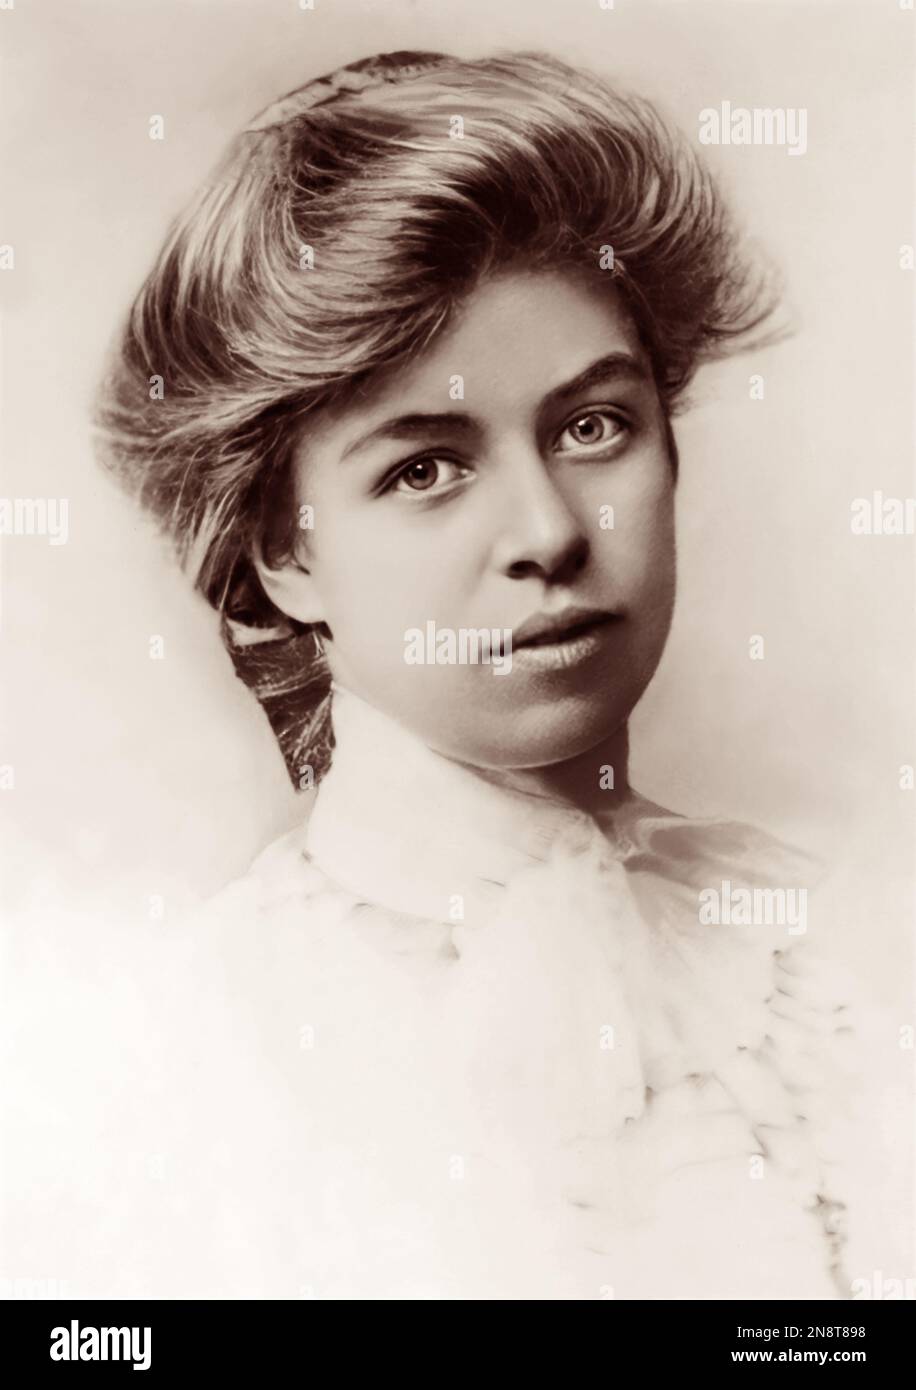 Eleanor Roosevelt (1884-1962), the longest-serving First Lady throughout her husband President Franklin D. Roosevelt's four terms in office, in an 1898 school portrait when she was 14 years old. (USA) Stock Photo